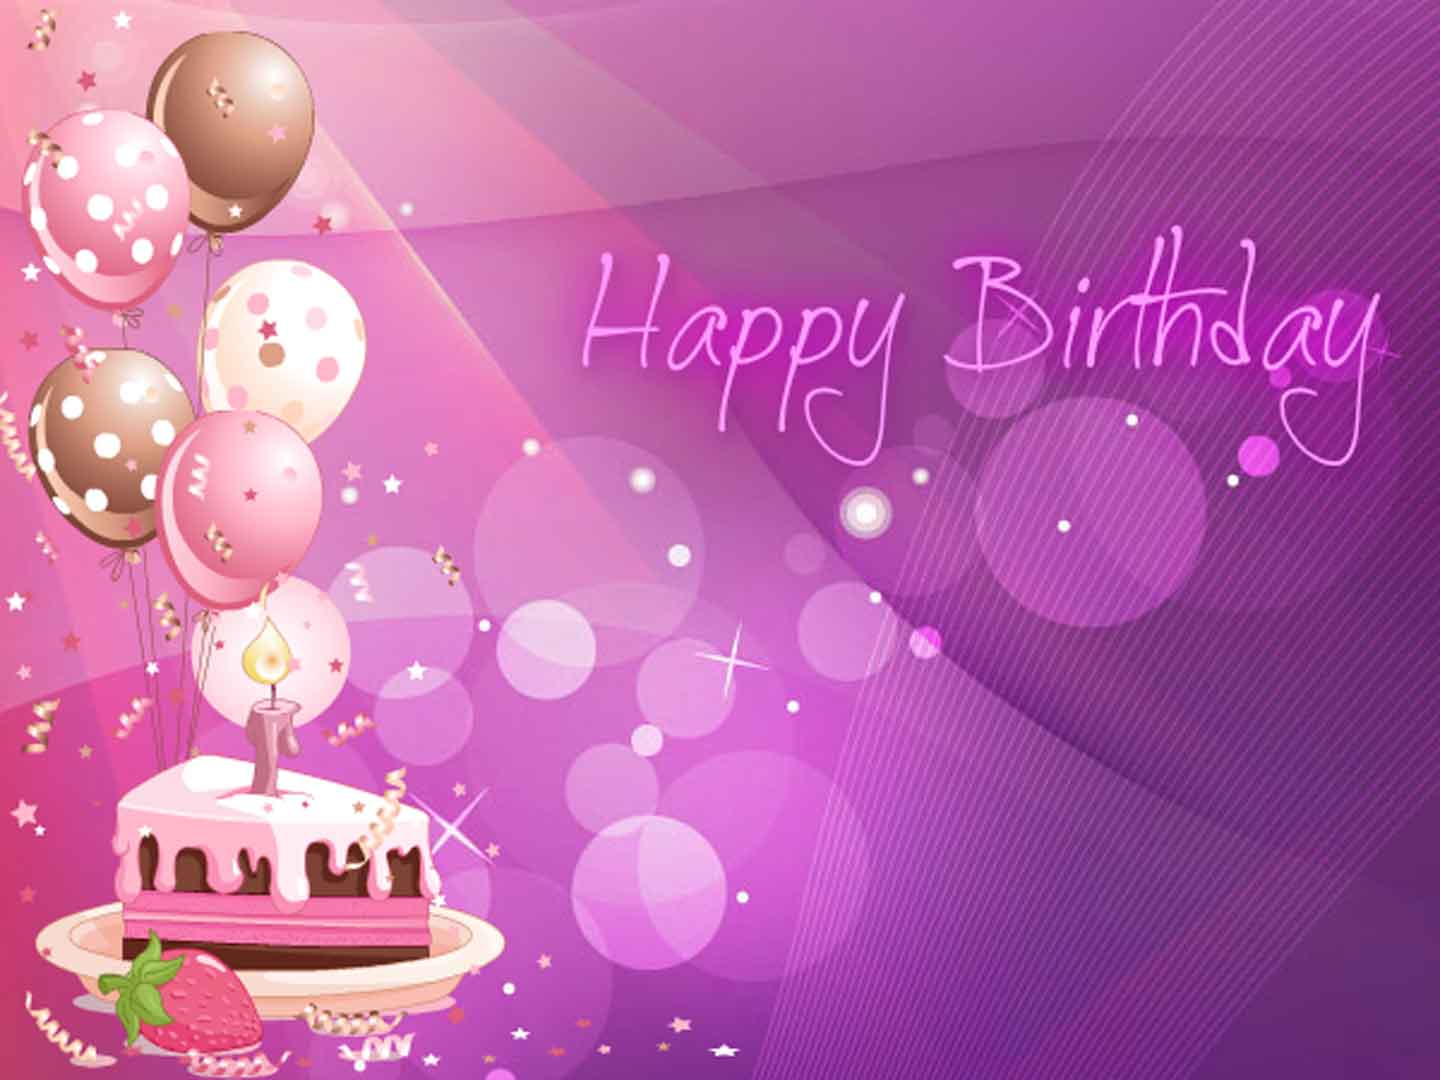 Wallpapers Of Happy Birthday - Wallpaper Cave